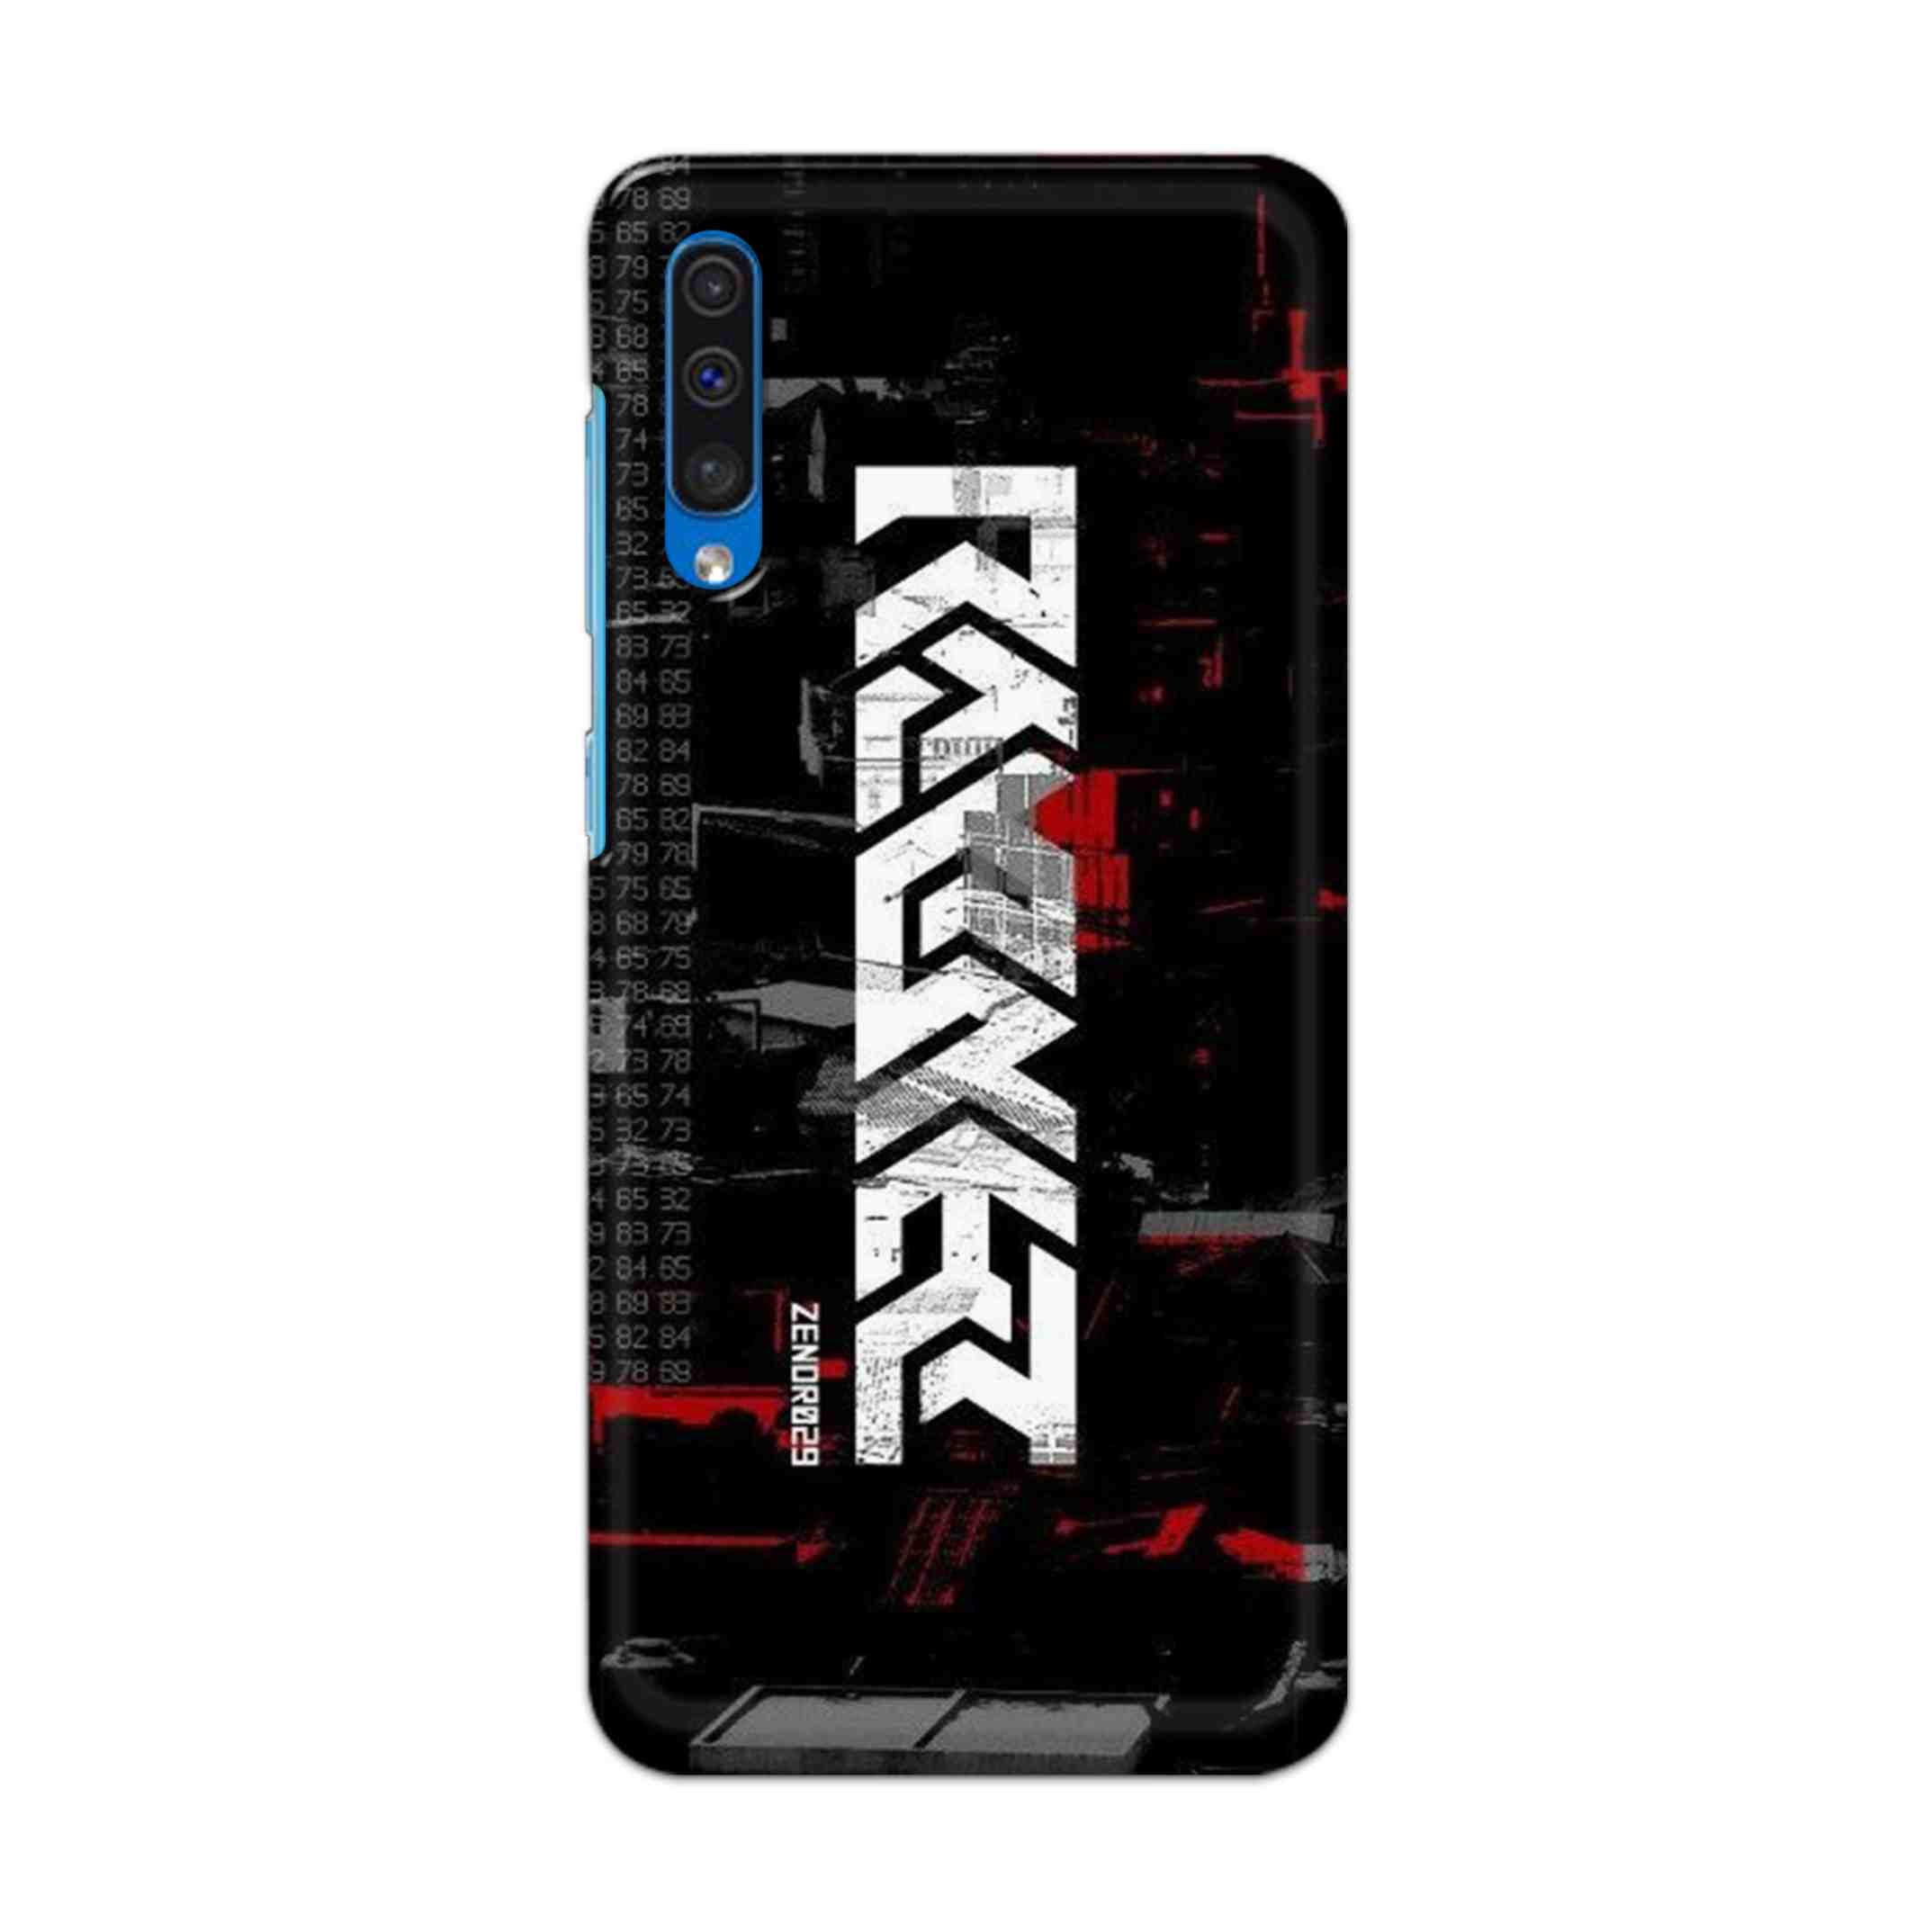 Buy Raxer Hard Back Mobile Phone Case Cover For Samsung Galaxy A50 / A50s / A30s Online